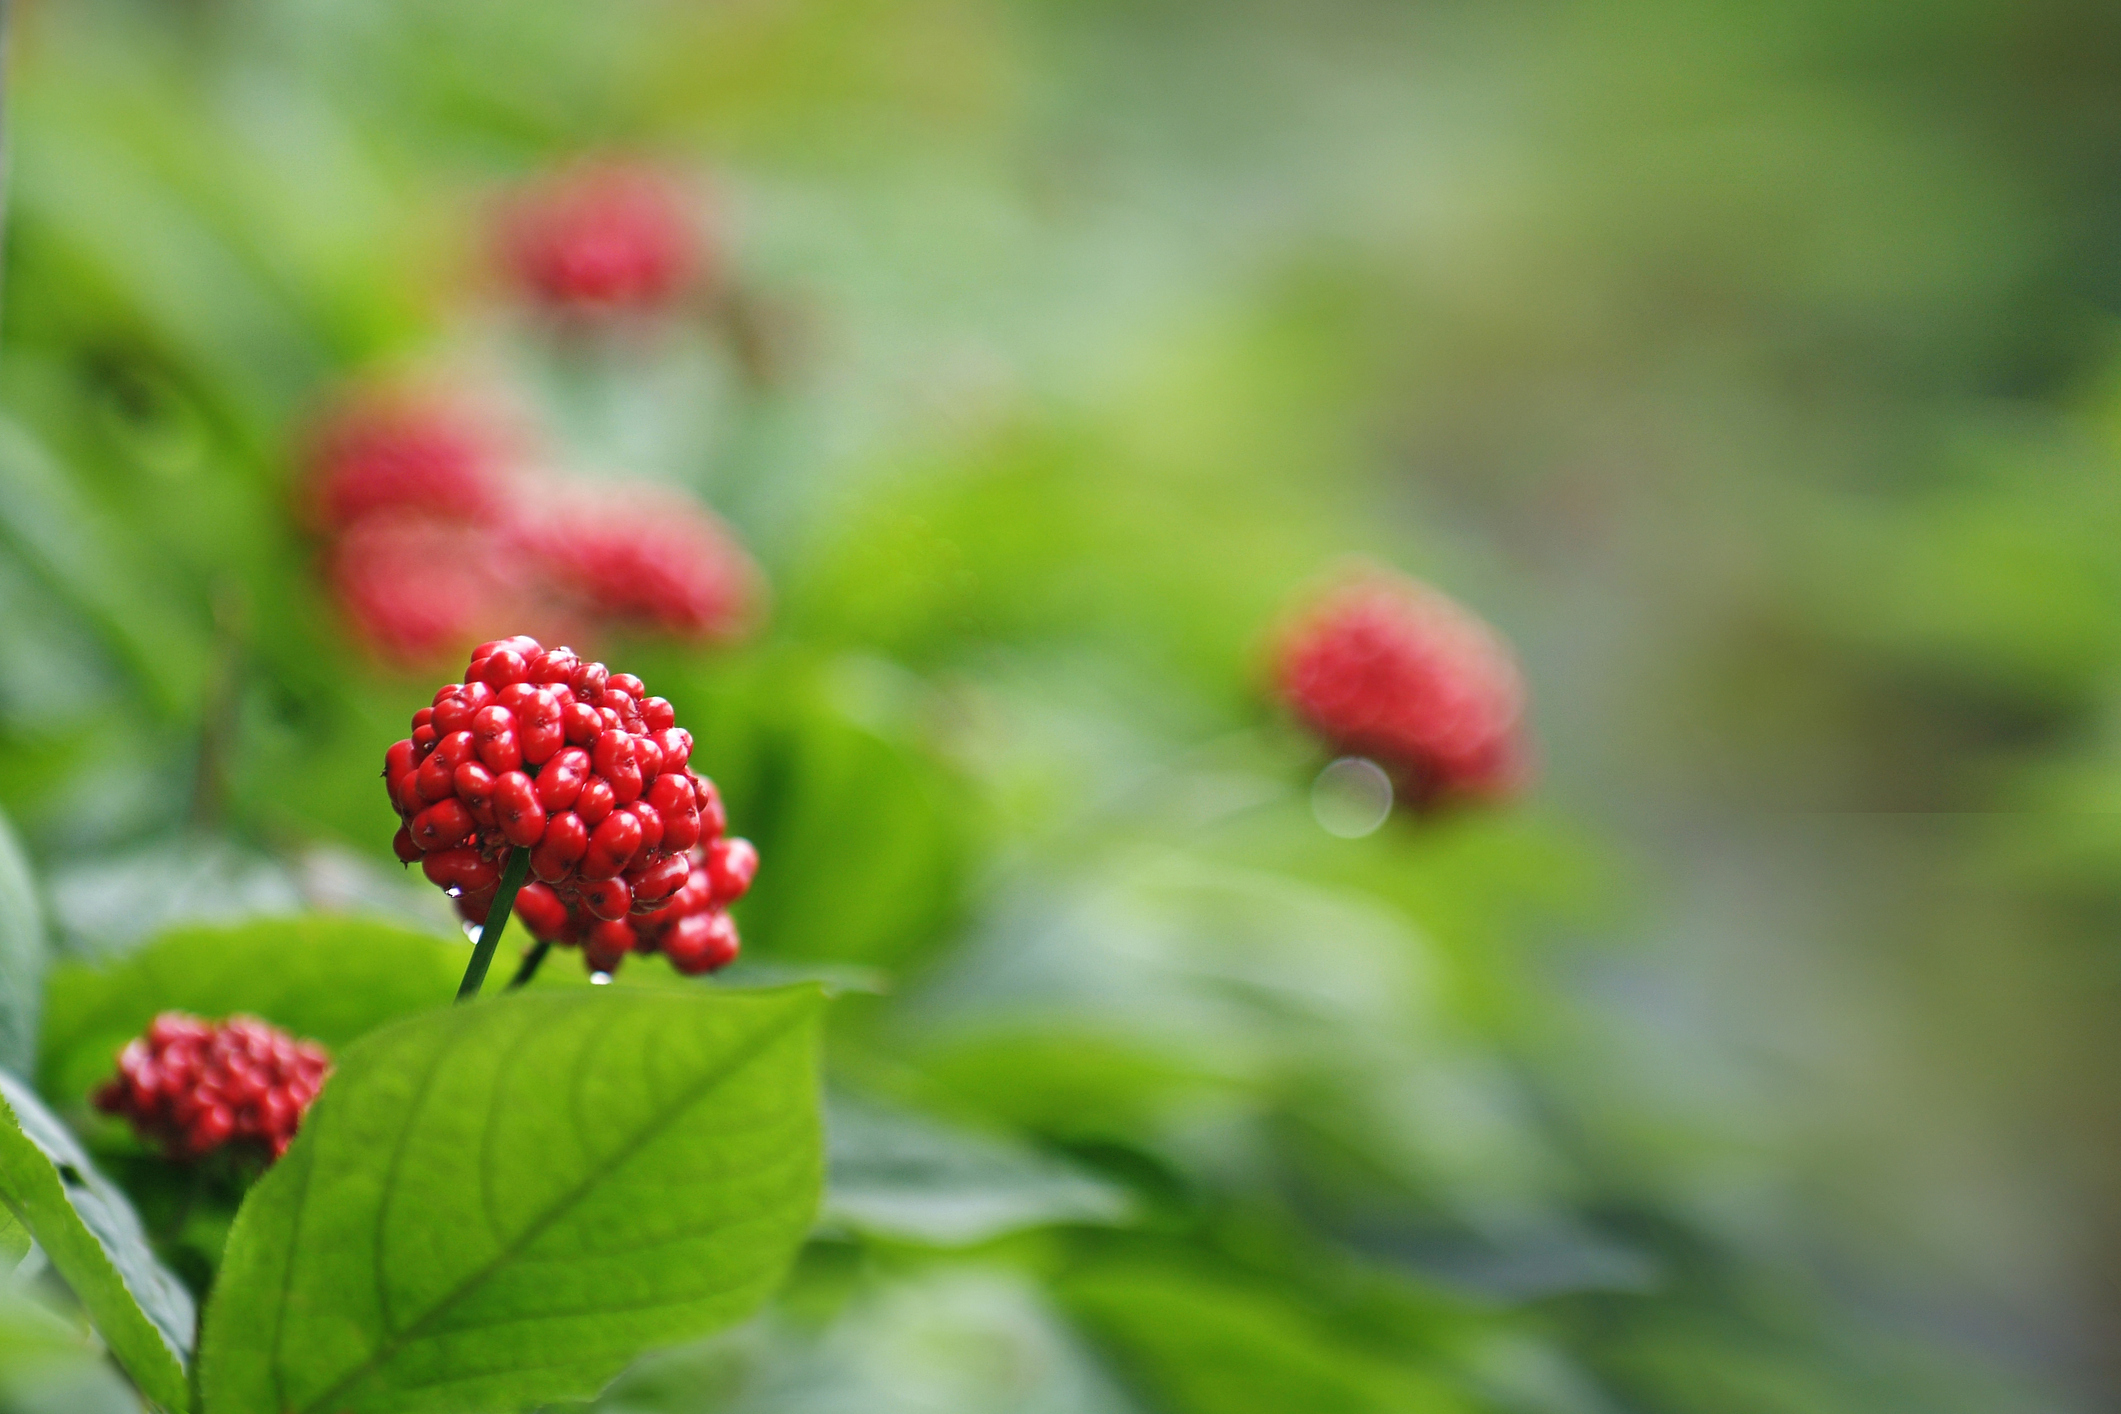 Red ginseng shown effective at suppressing lung cancer